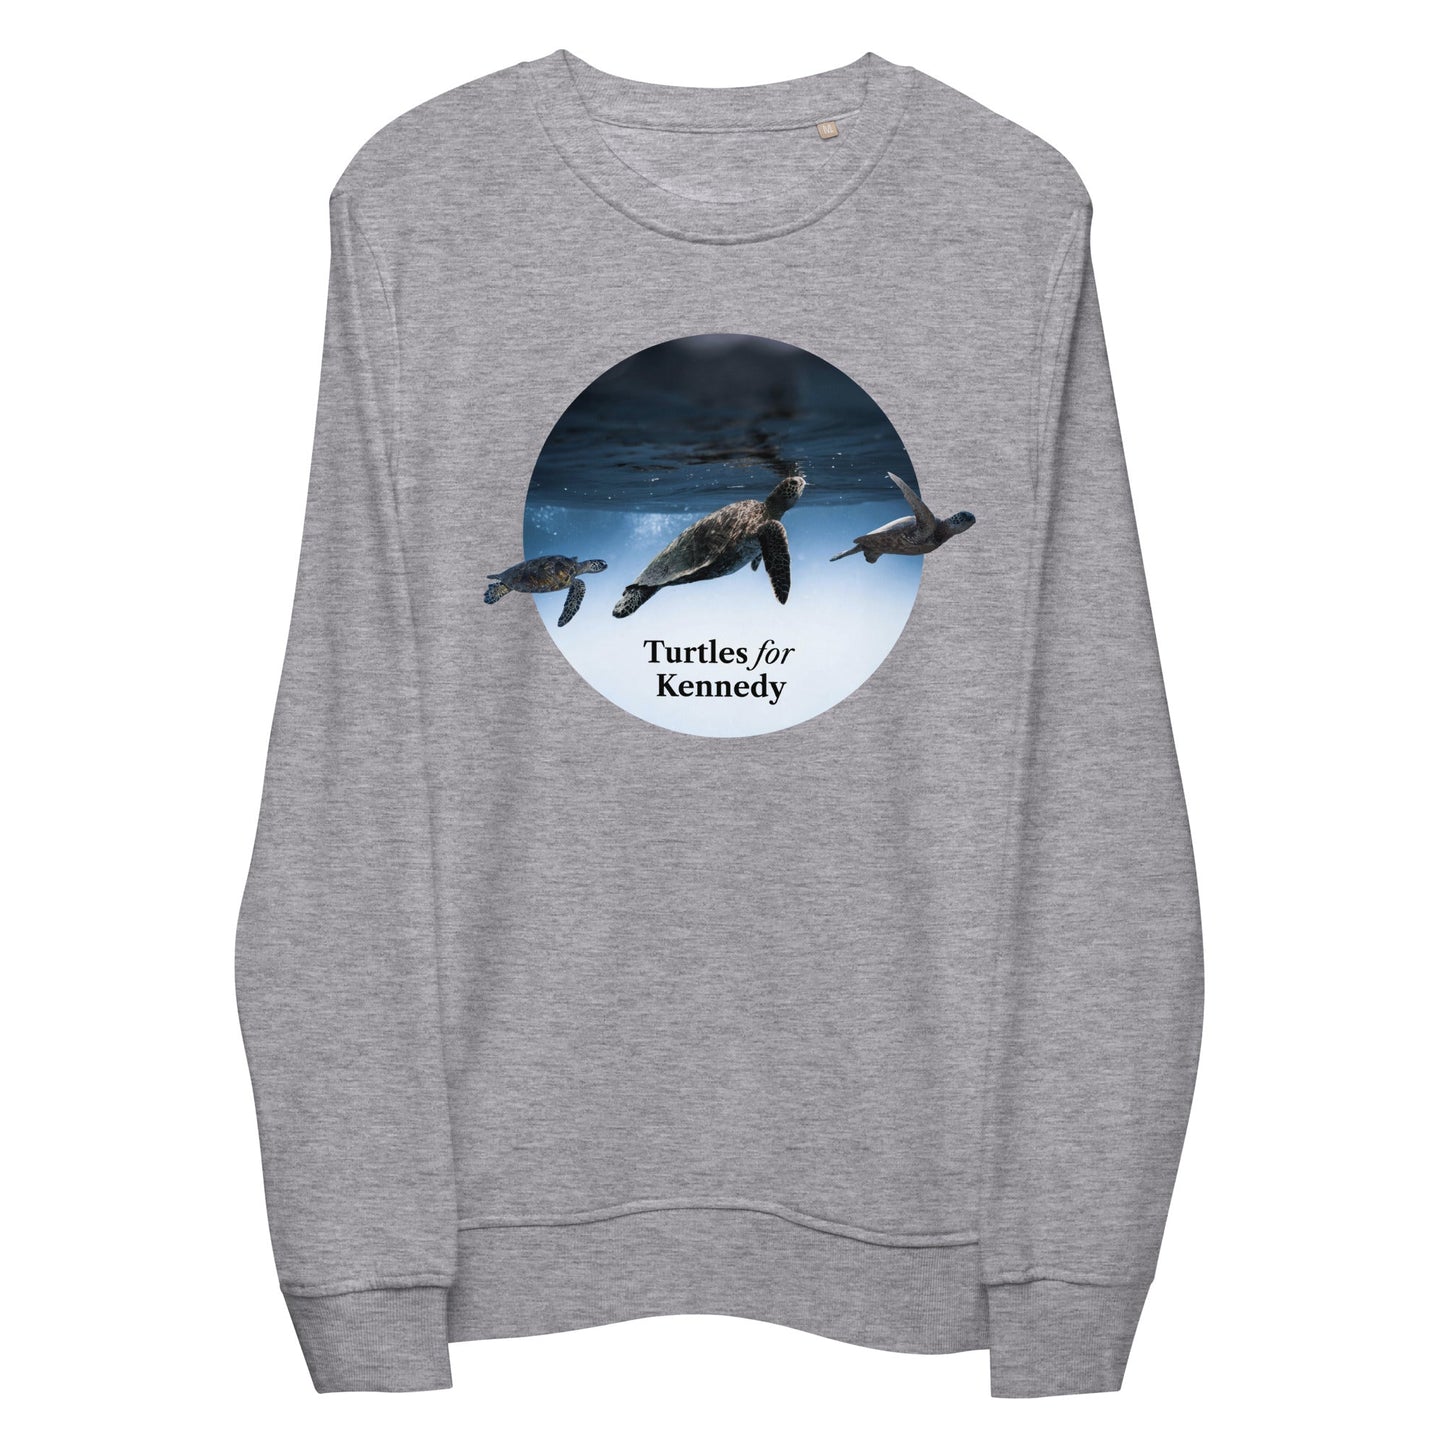 Turtles for Kennedy Organic Sweatshirt - TEAM KENNEDY. All rights reserved